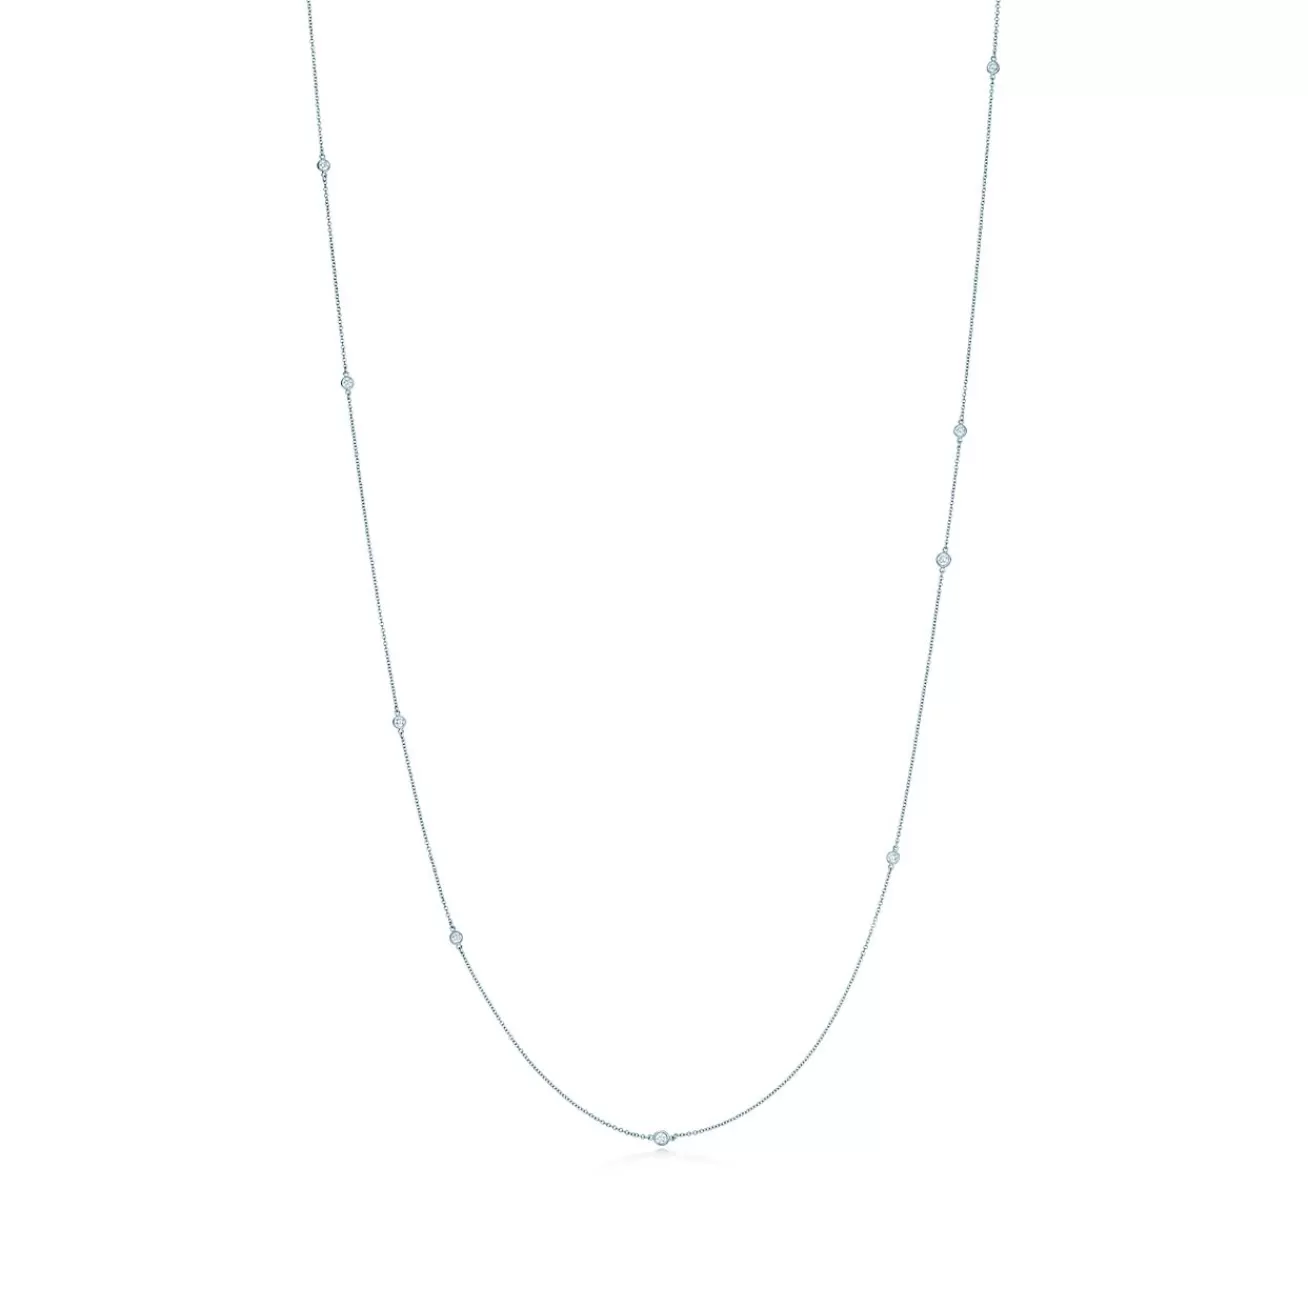 Tiffany & Co. Elsa Peretti® Diamonds by the Yard® sprinkle necklace in platinum. | ^ Necklaces & Pendants | Dainty Jewelry